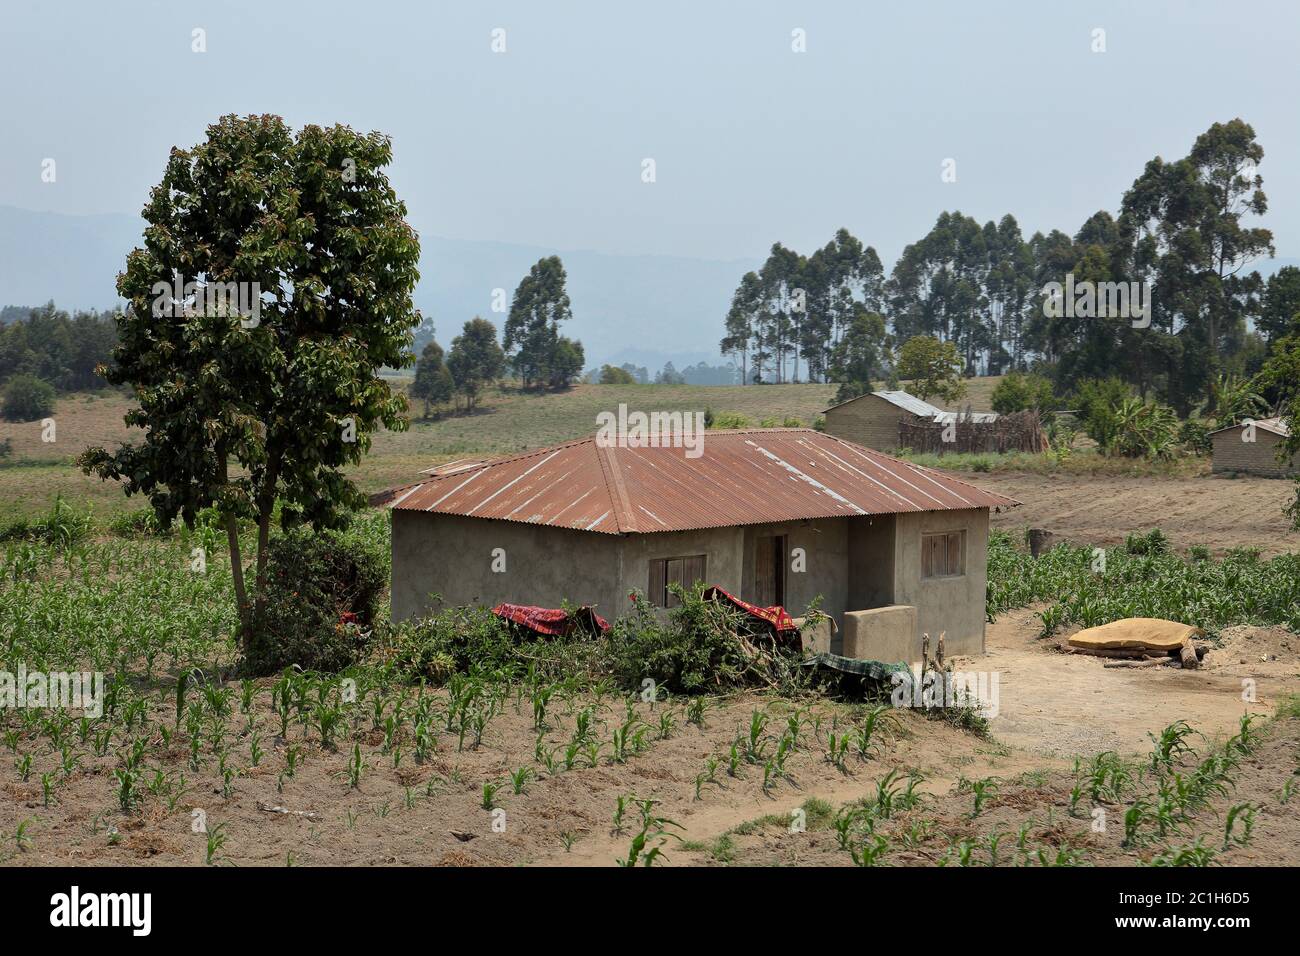 Farm and agriculture in Tanzania Stock Photo